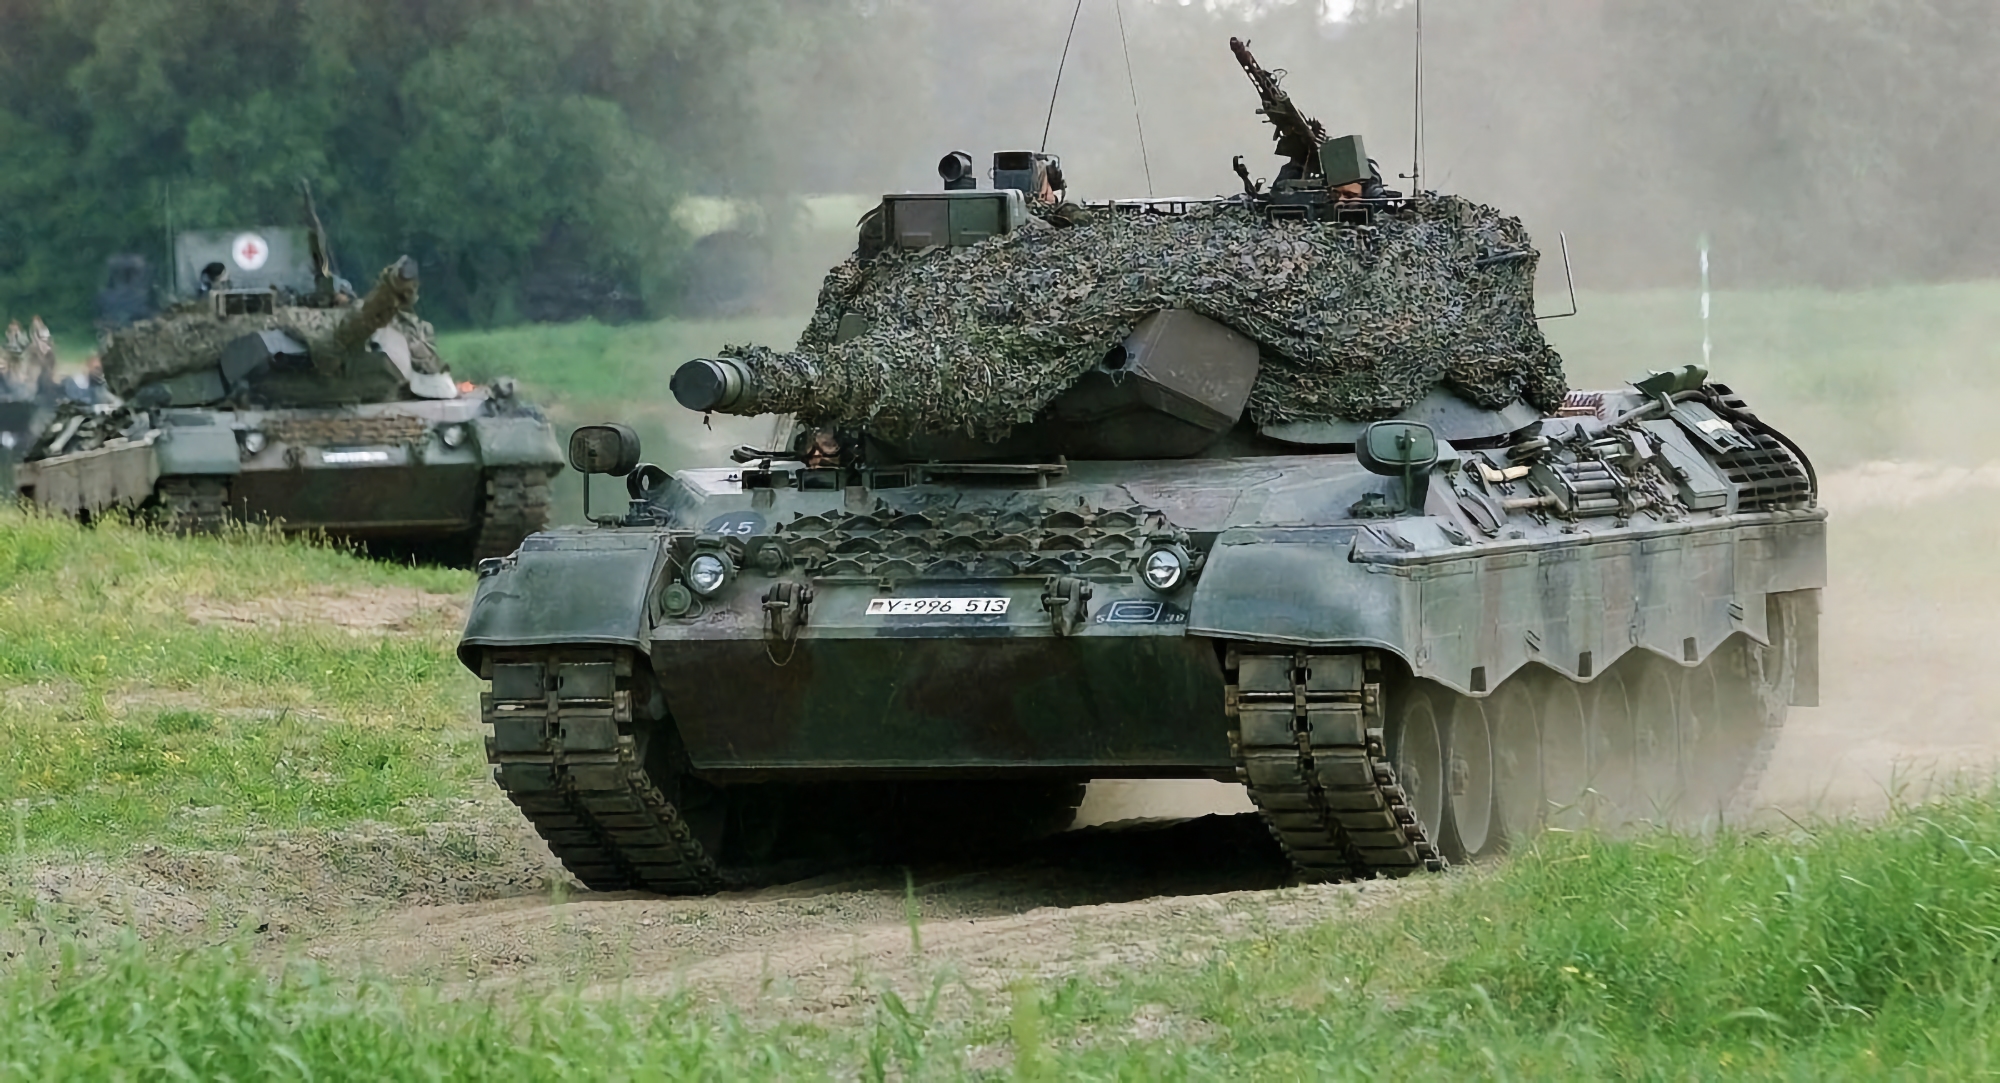 Netherlands, together with Germany and Denmark, will give Ukraine 100 Leopard 1A5 tanks